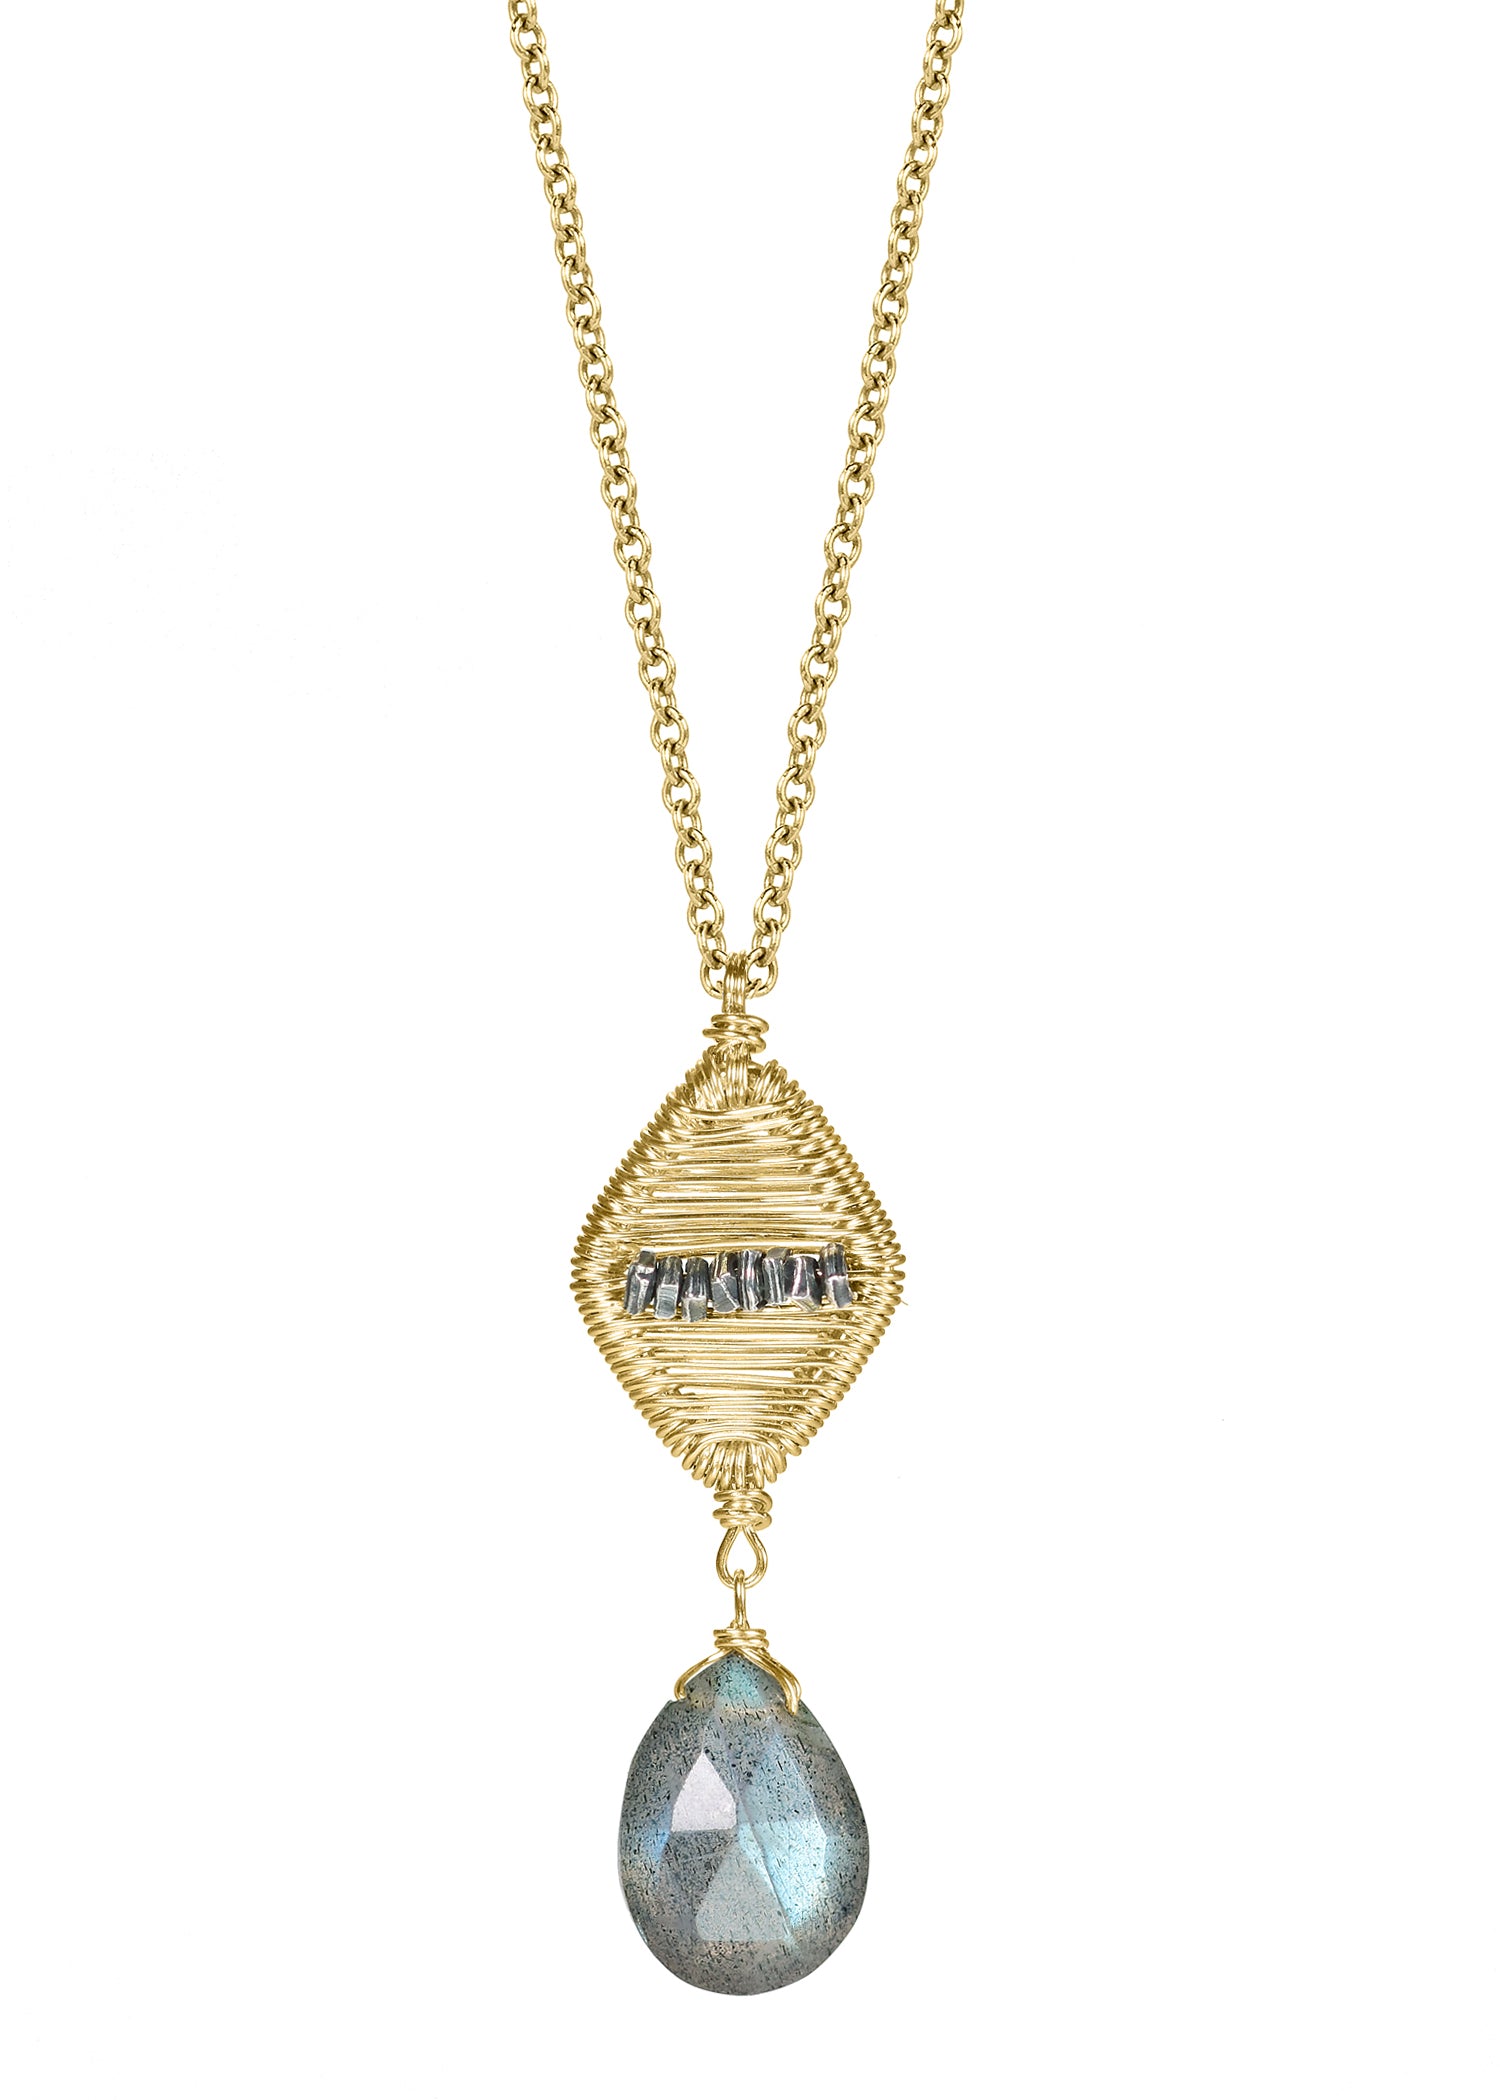 Labradorite 14k gold fill Sterling silver Mixed metal Necklace measures 17" in length Pendant measures 1" in length and 3/8" in width at the widest point Handmade in our Los Angeles studio